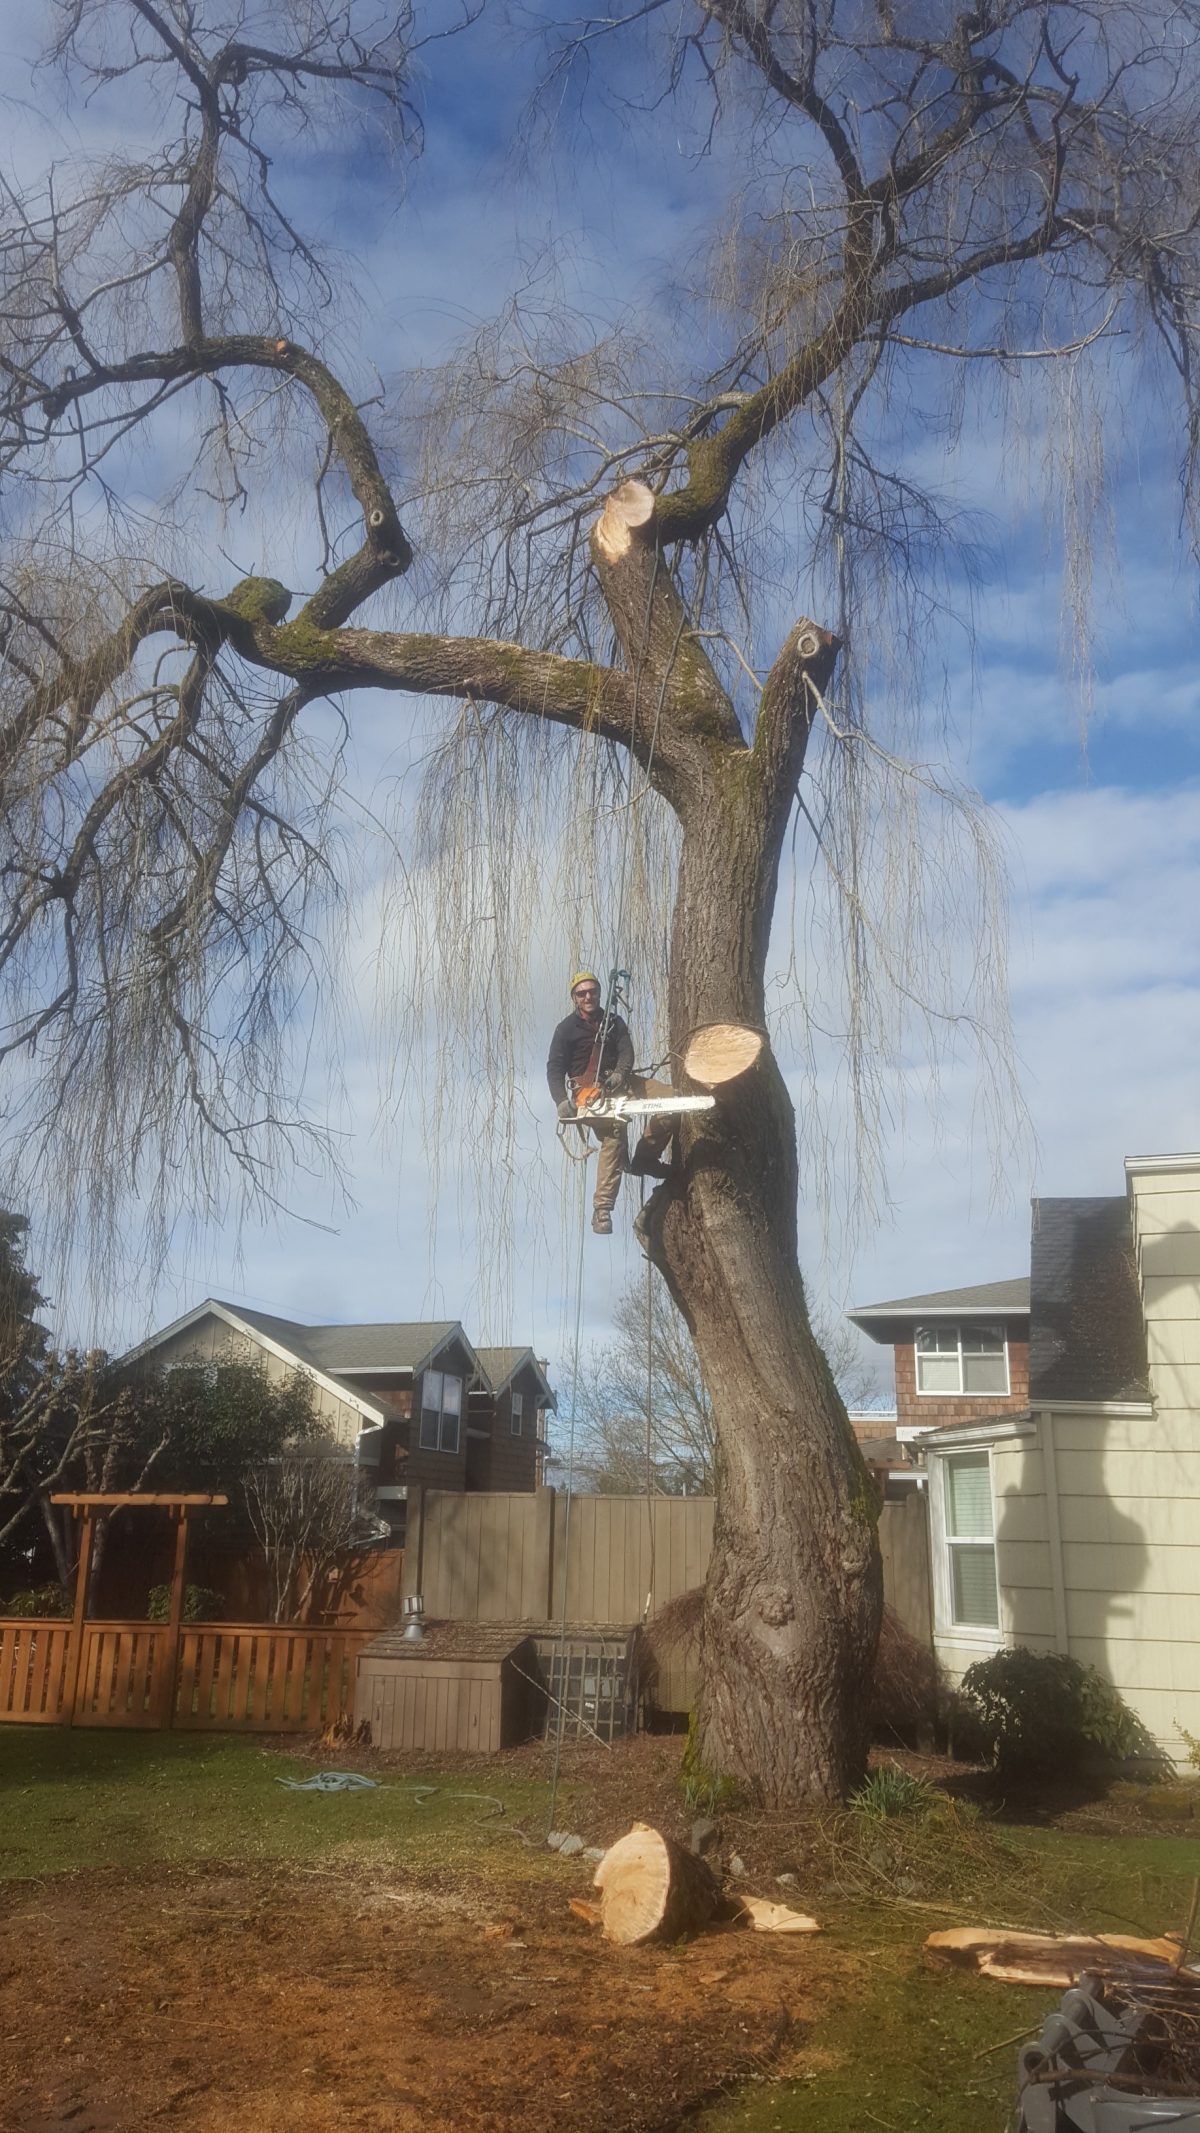 Climber Matt works at removing a dead Weeping Willow tree.